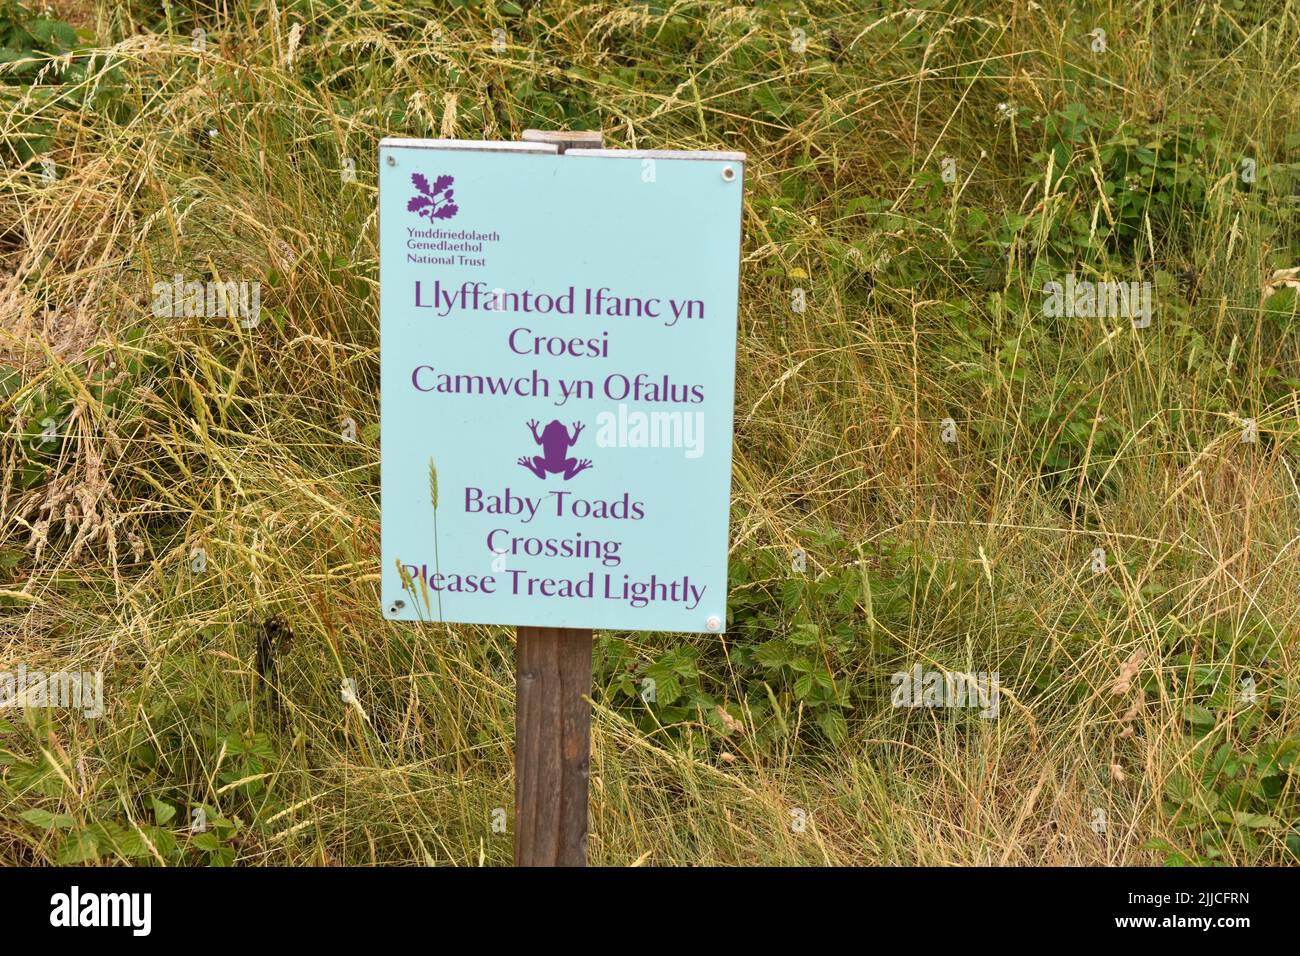 Baby Toads Crossing Please Tread Lightly Sign, Bosherston, Stackpole, Pembrokeshire, pays de Galles Banque D'Images